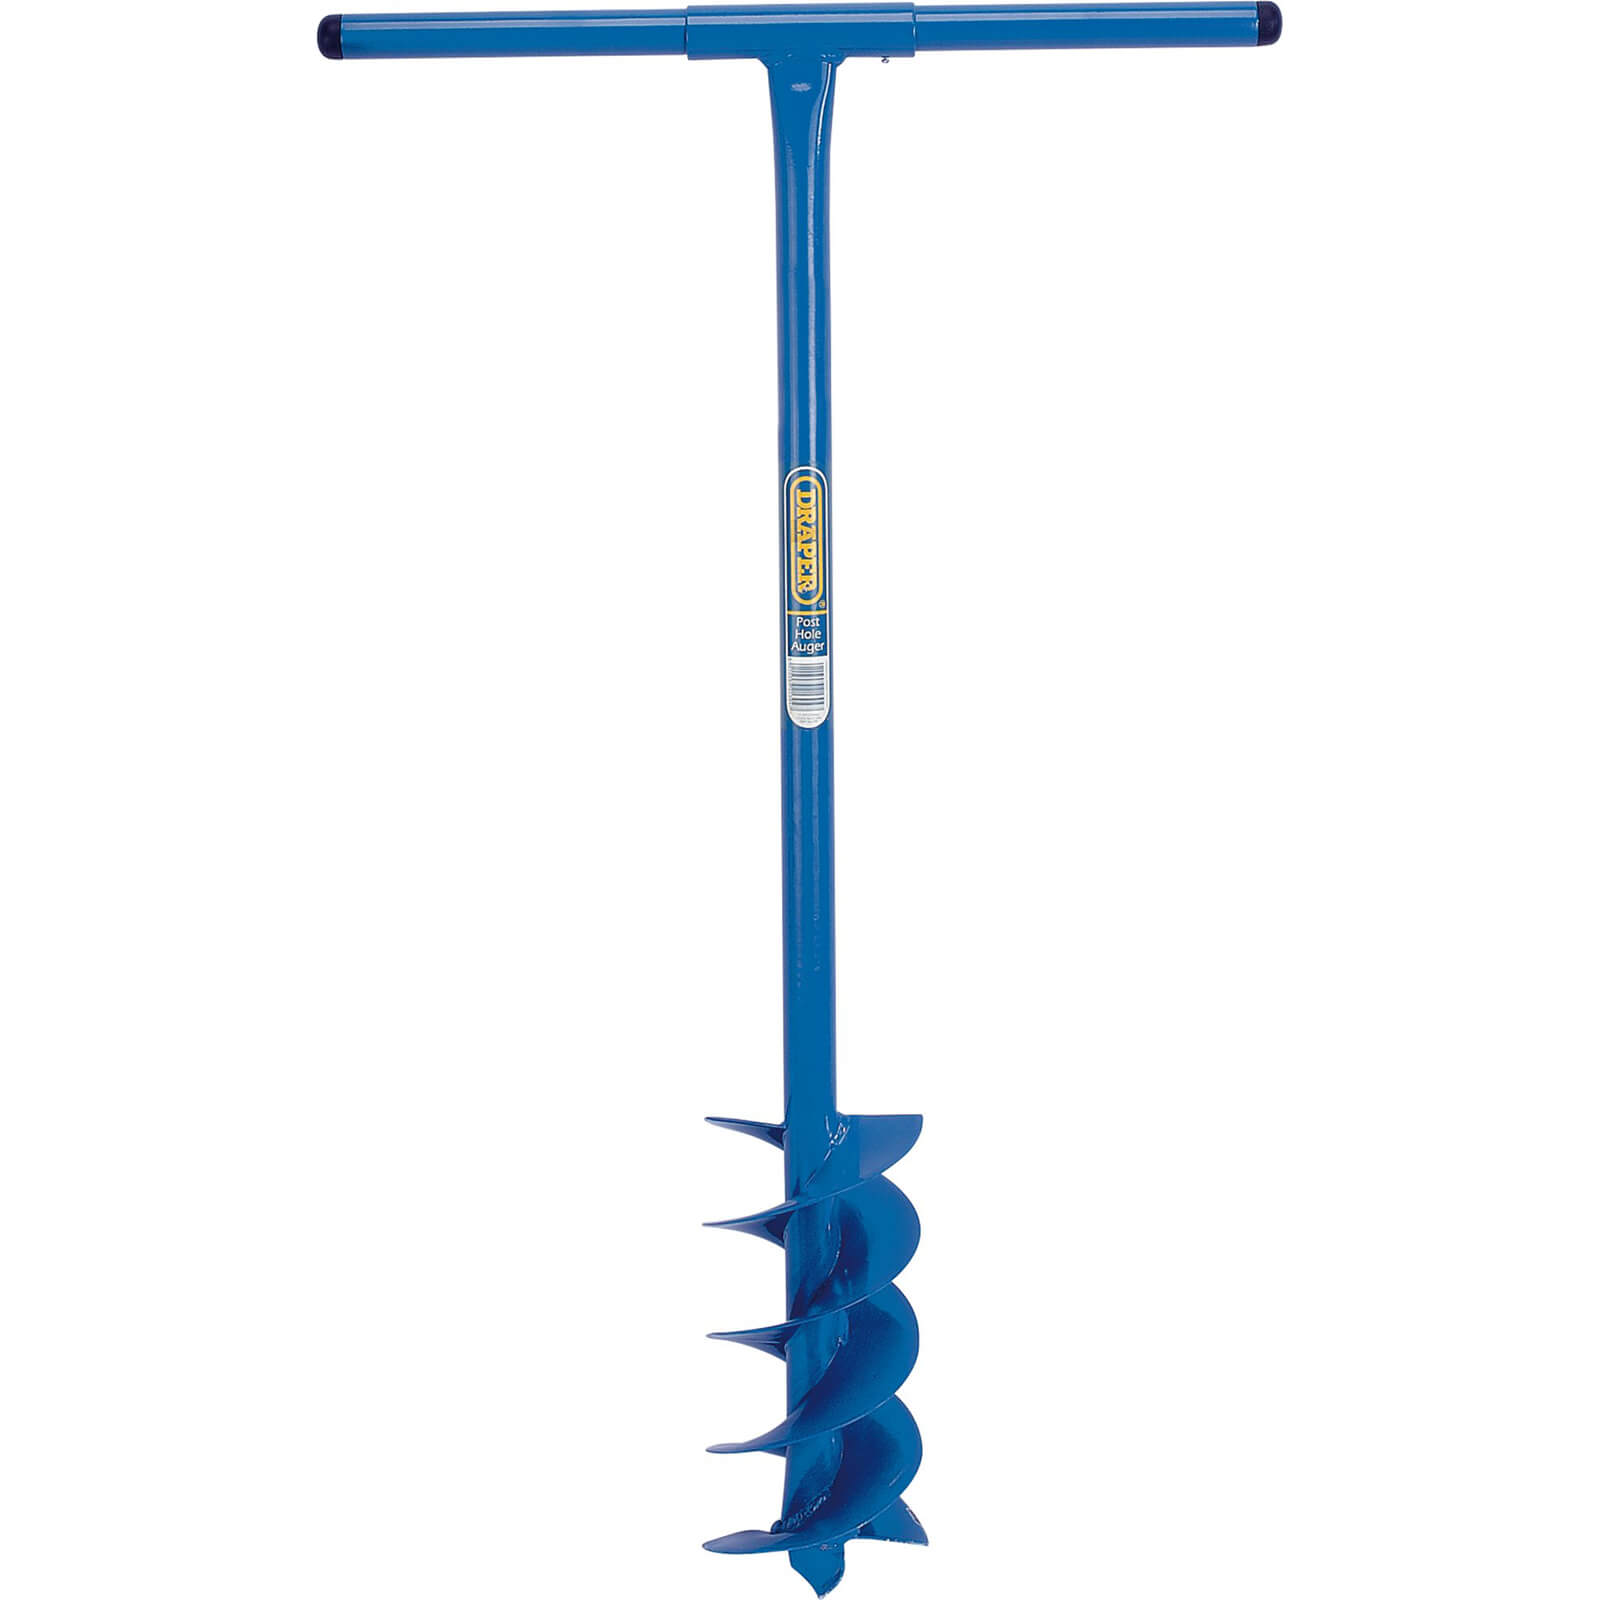 Image of Draper Fence Post Auger